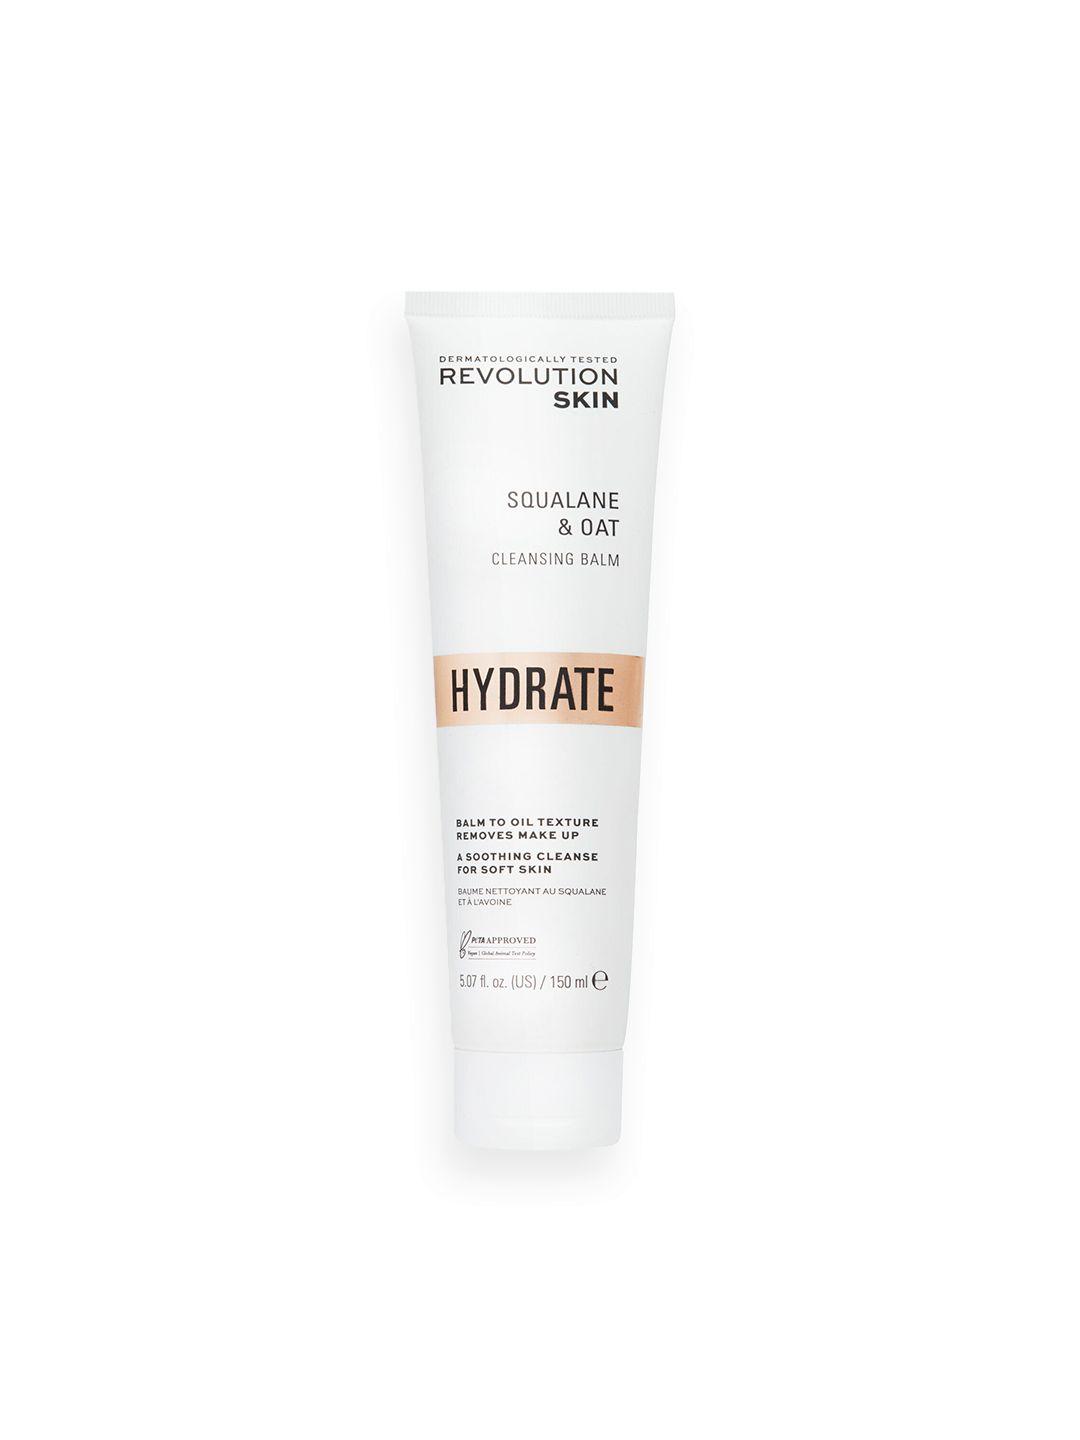 makeup revolution london skincare hydrate squalane & oat cleansing balm - 150ml